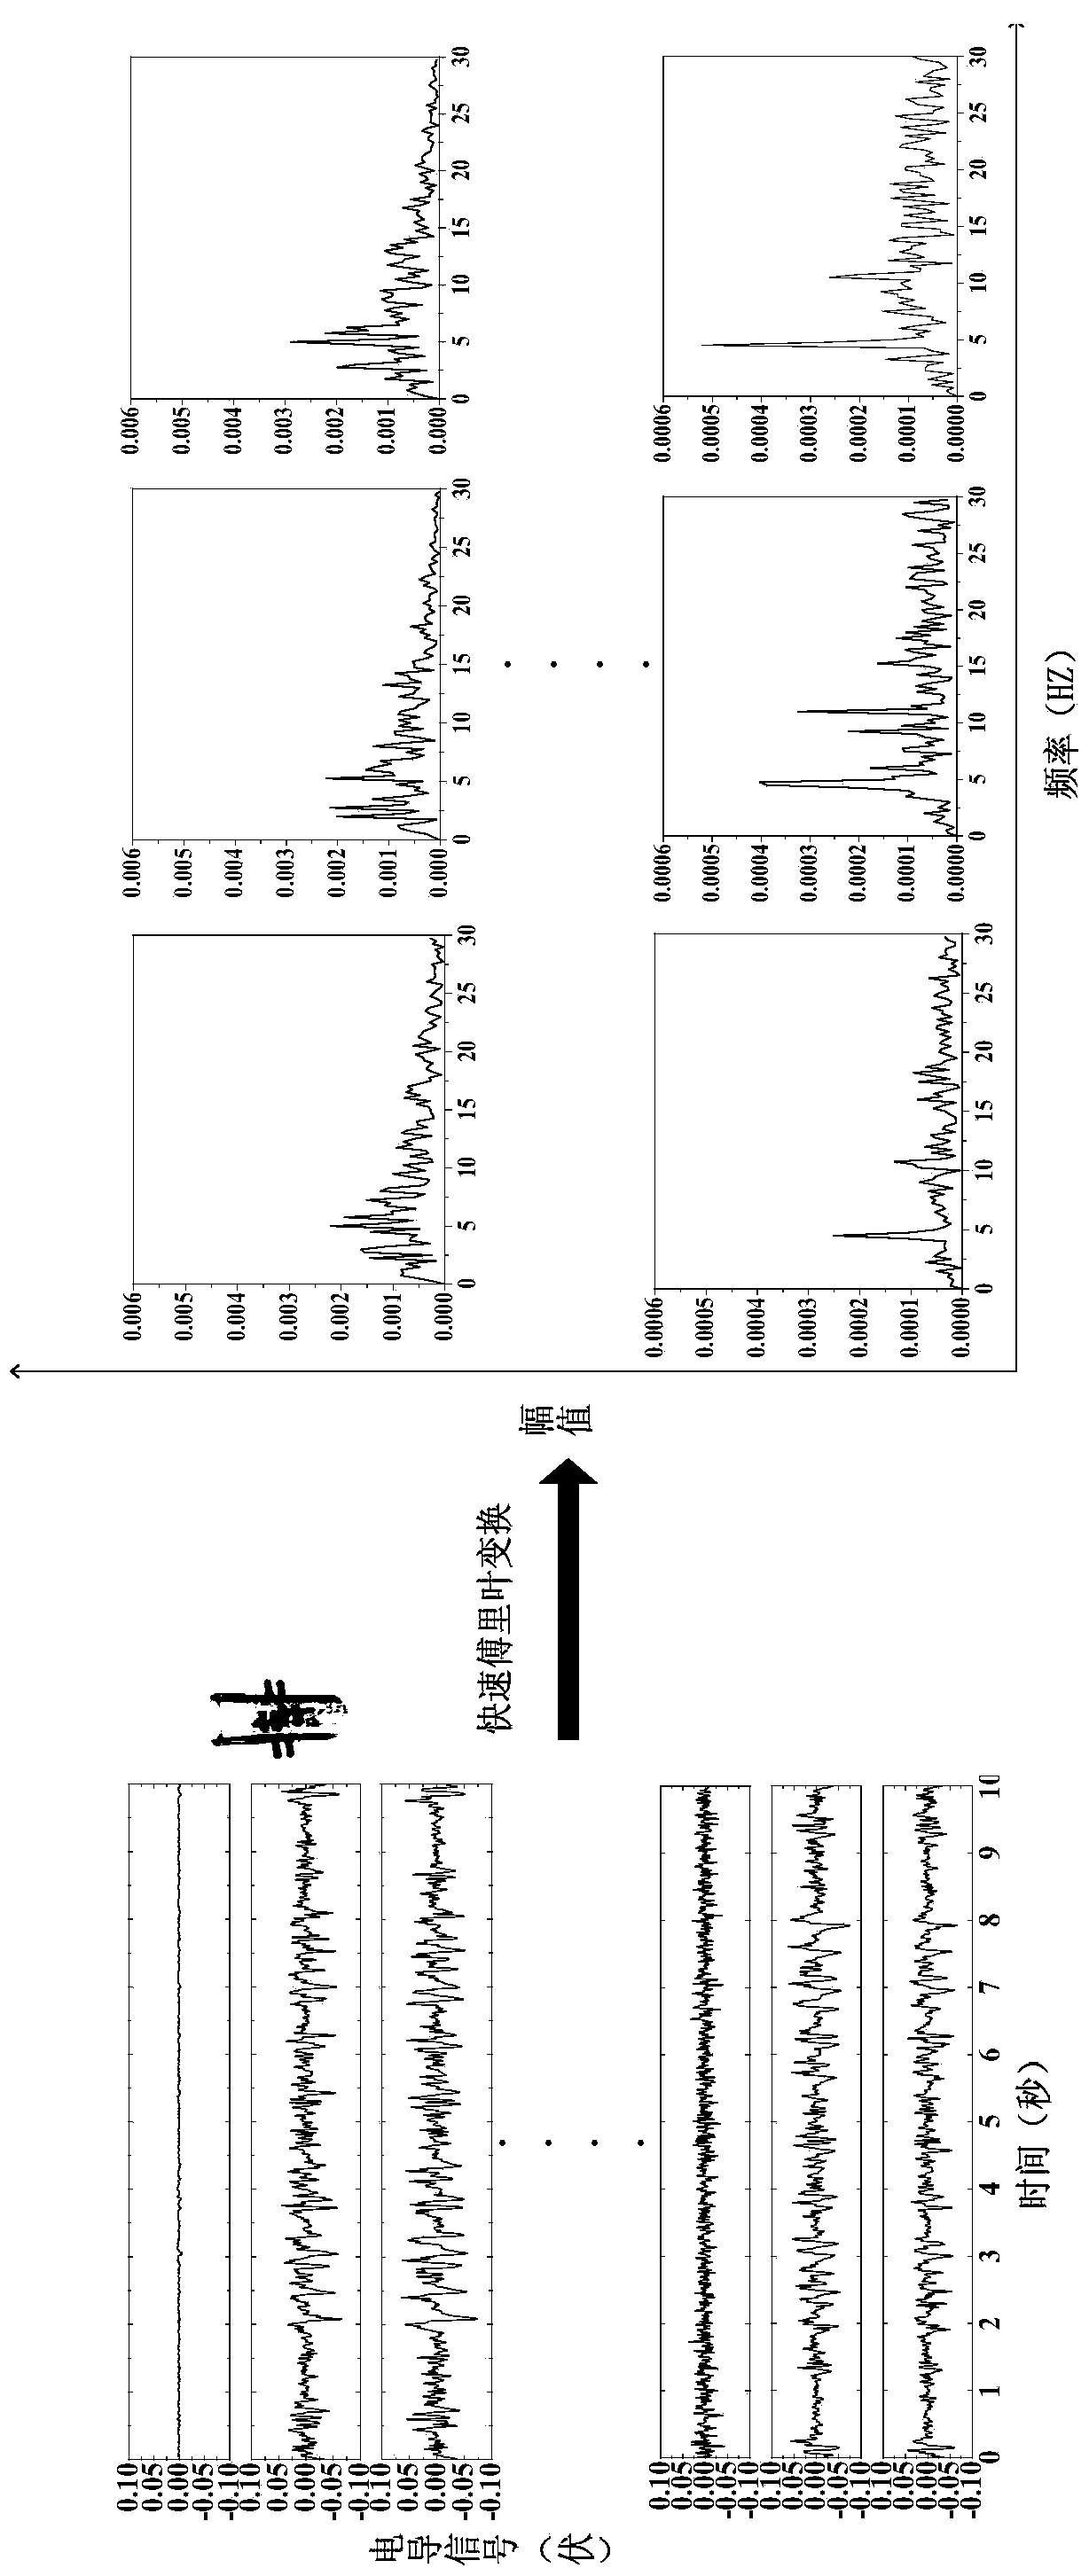 Vertical oil-water phase content measurement and verification method based on frequency complex network